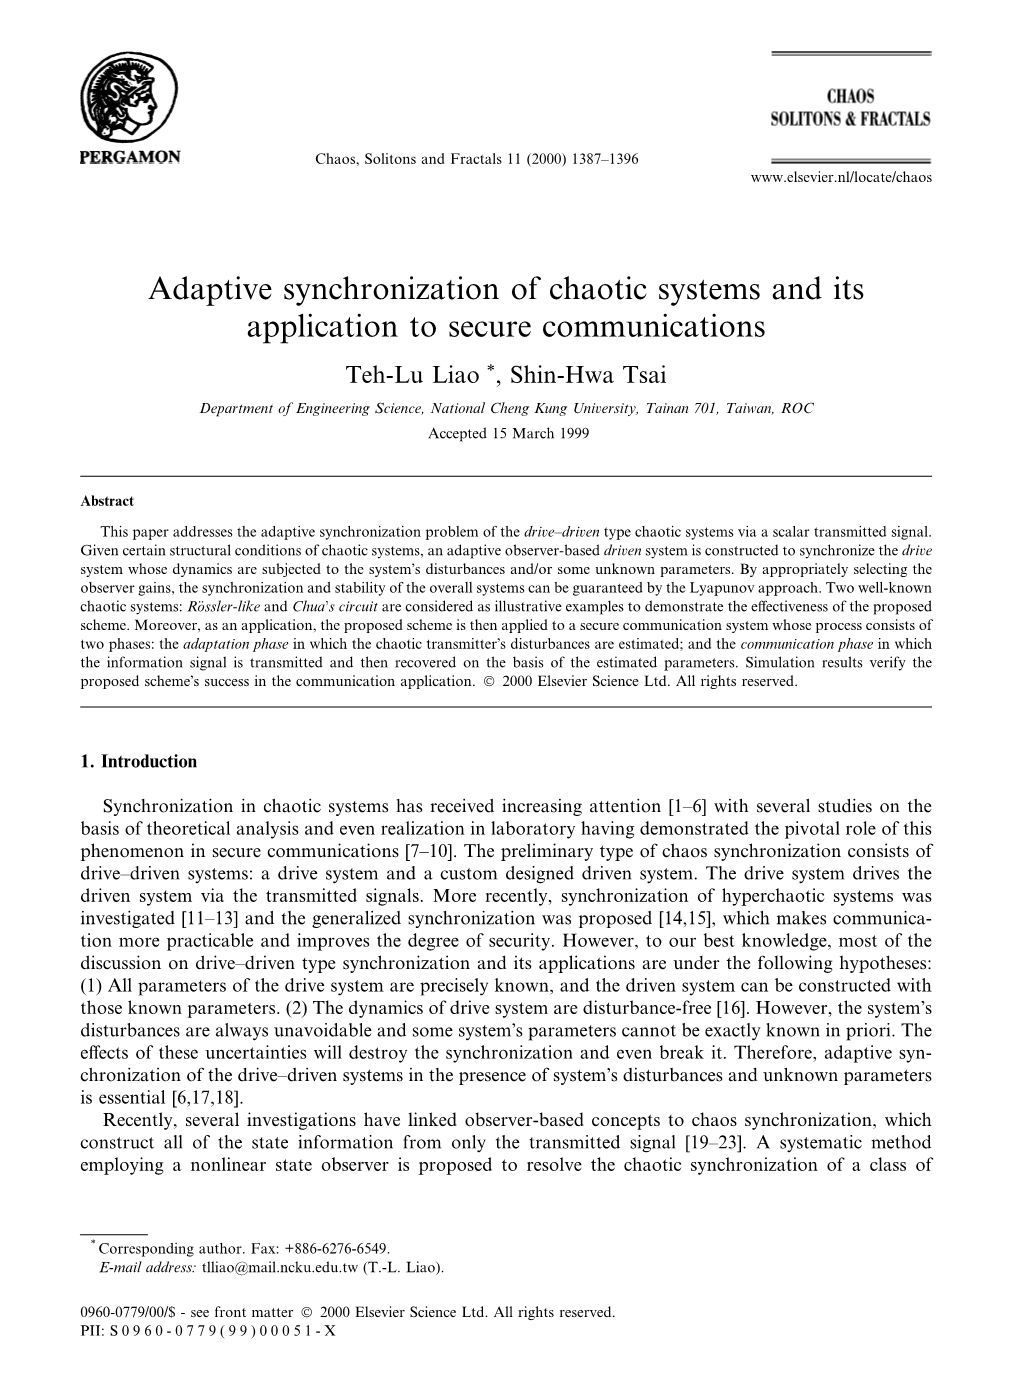 Adaptive Synchronization of Chaotic Systems and Its Application to Secure Communications